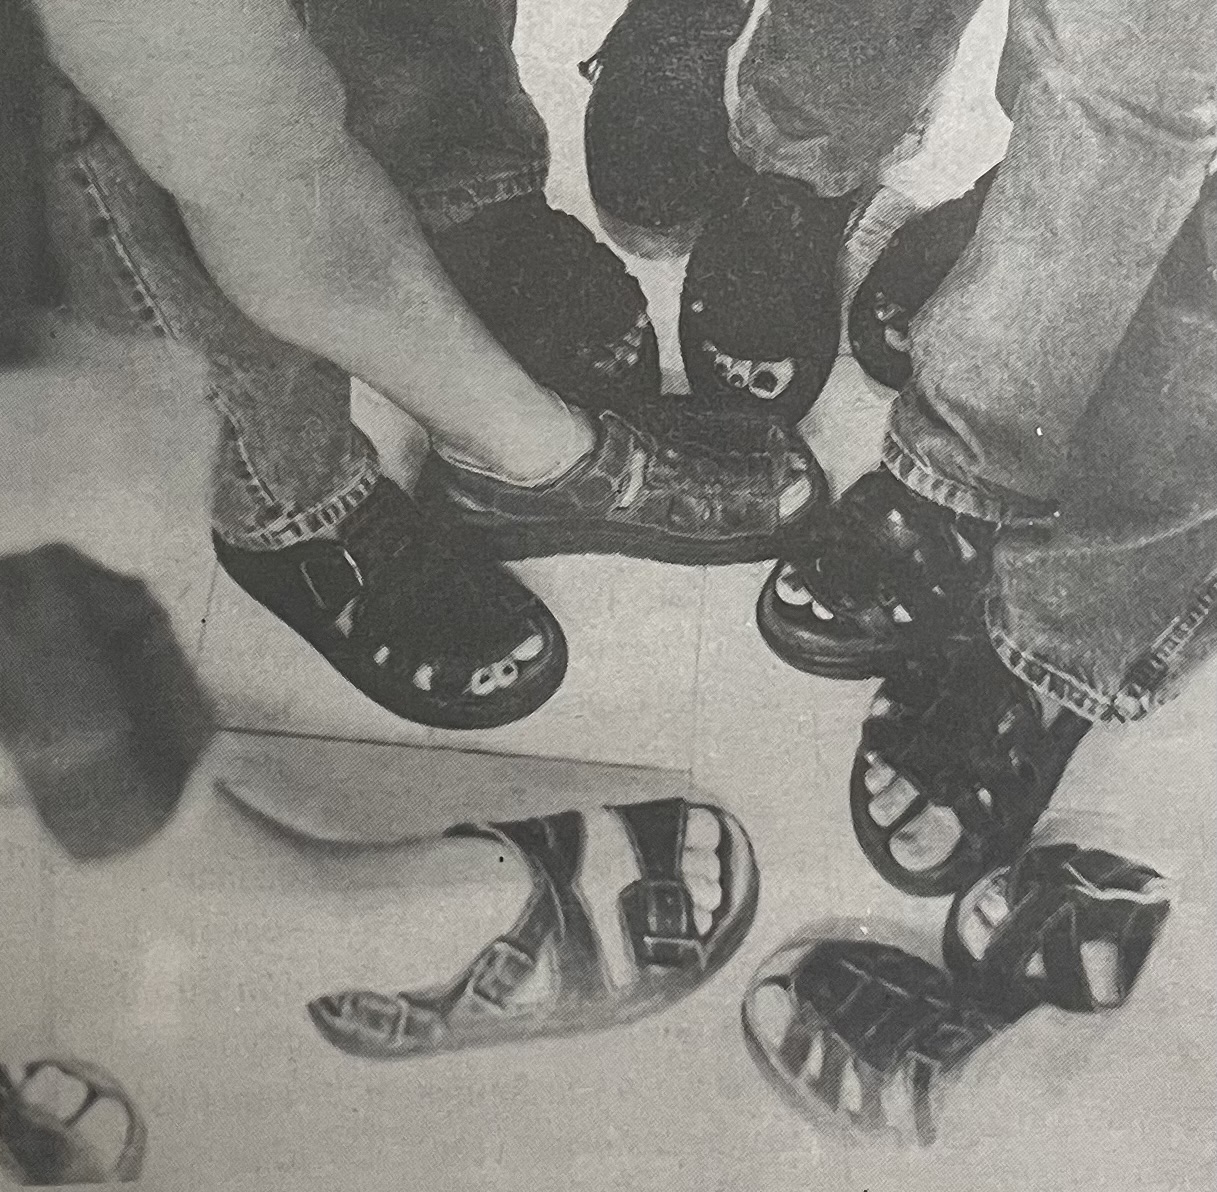 A gaggle of sophomores sport their Doc Marten sandals in the main hallway during lunch. Each pair carries a hefty price tag: at least $100 each. The sandals are popular among both boys and girls. For the first time, Doc Martens have made the full jump from grunge to prep. Caption by unknown student.